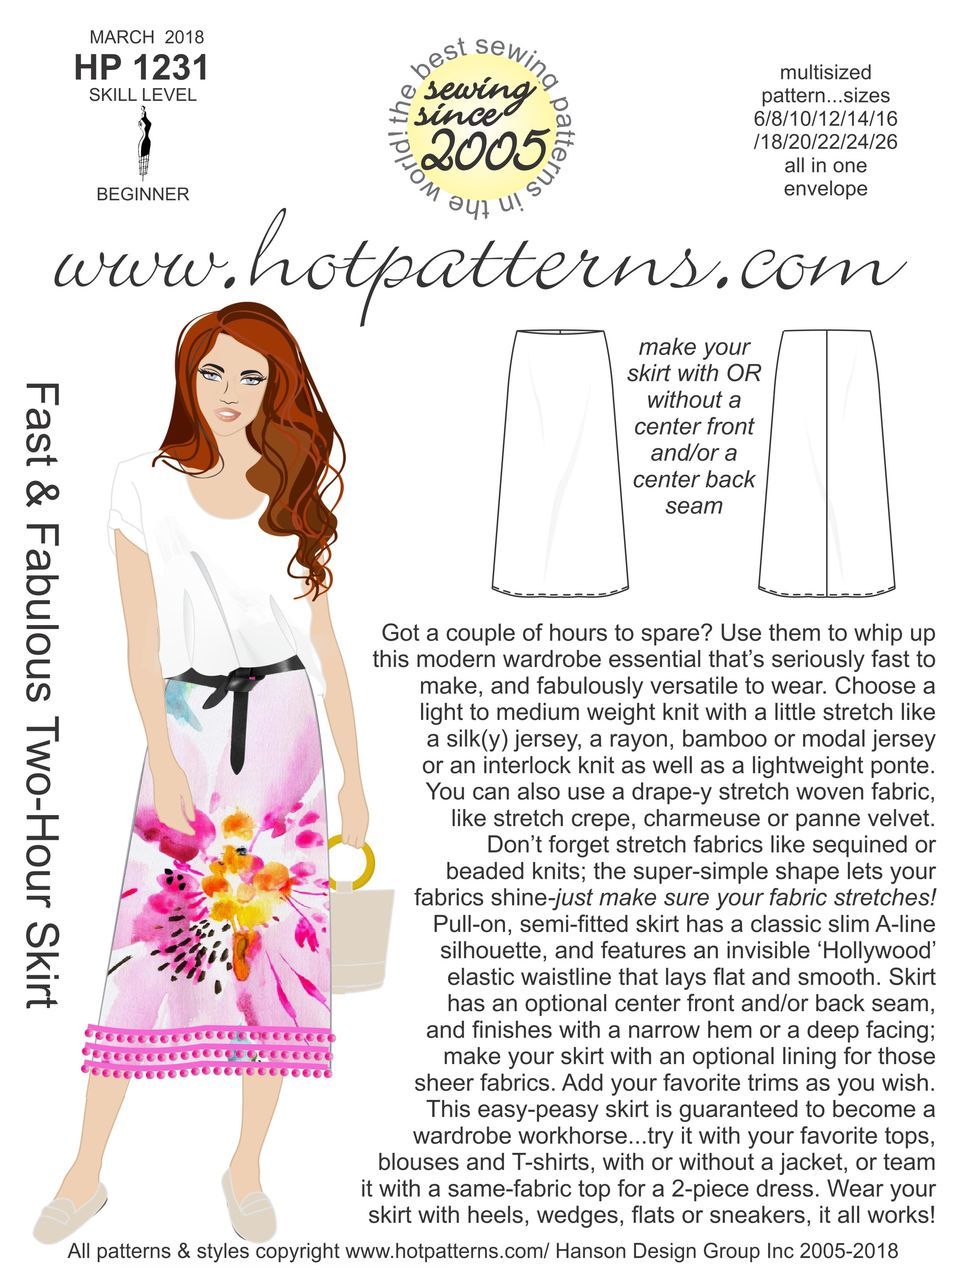 Coming Soon ... Latest Hot Pattern release - Fast & Fabulous Two-Hour Skirt !!!